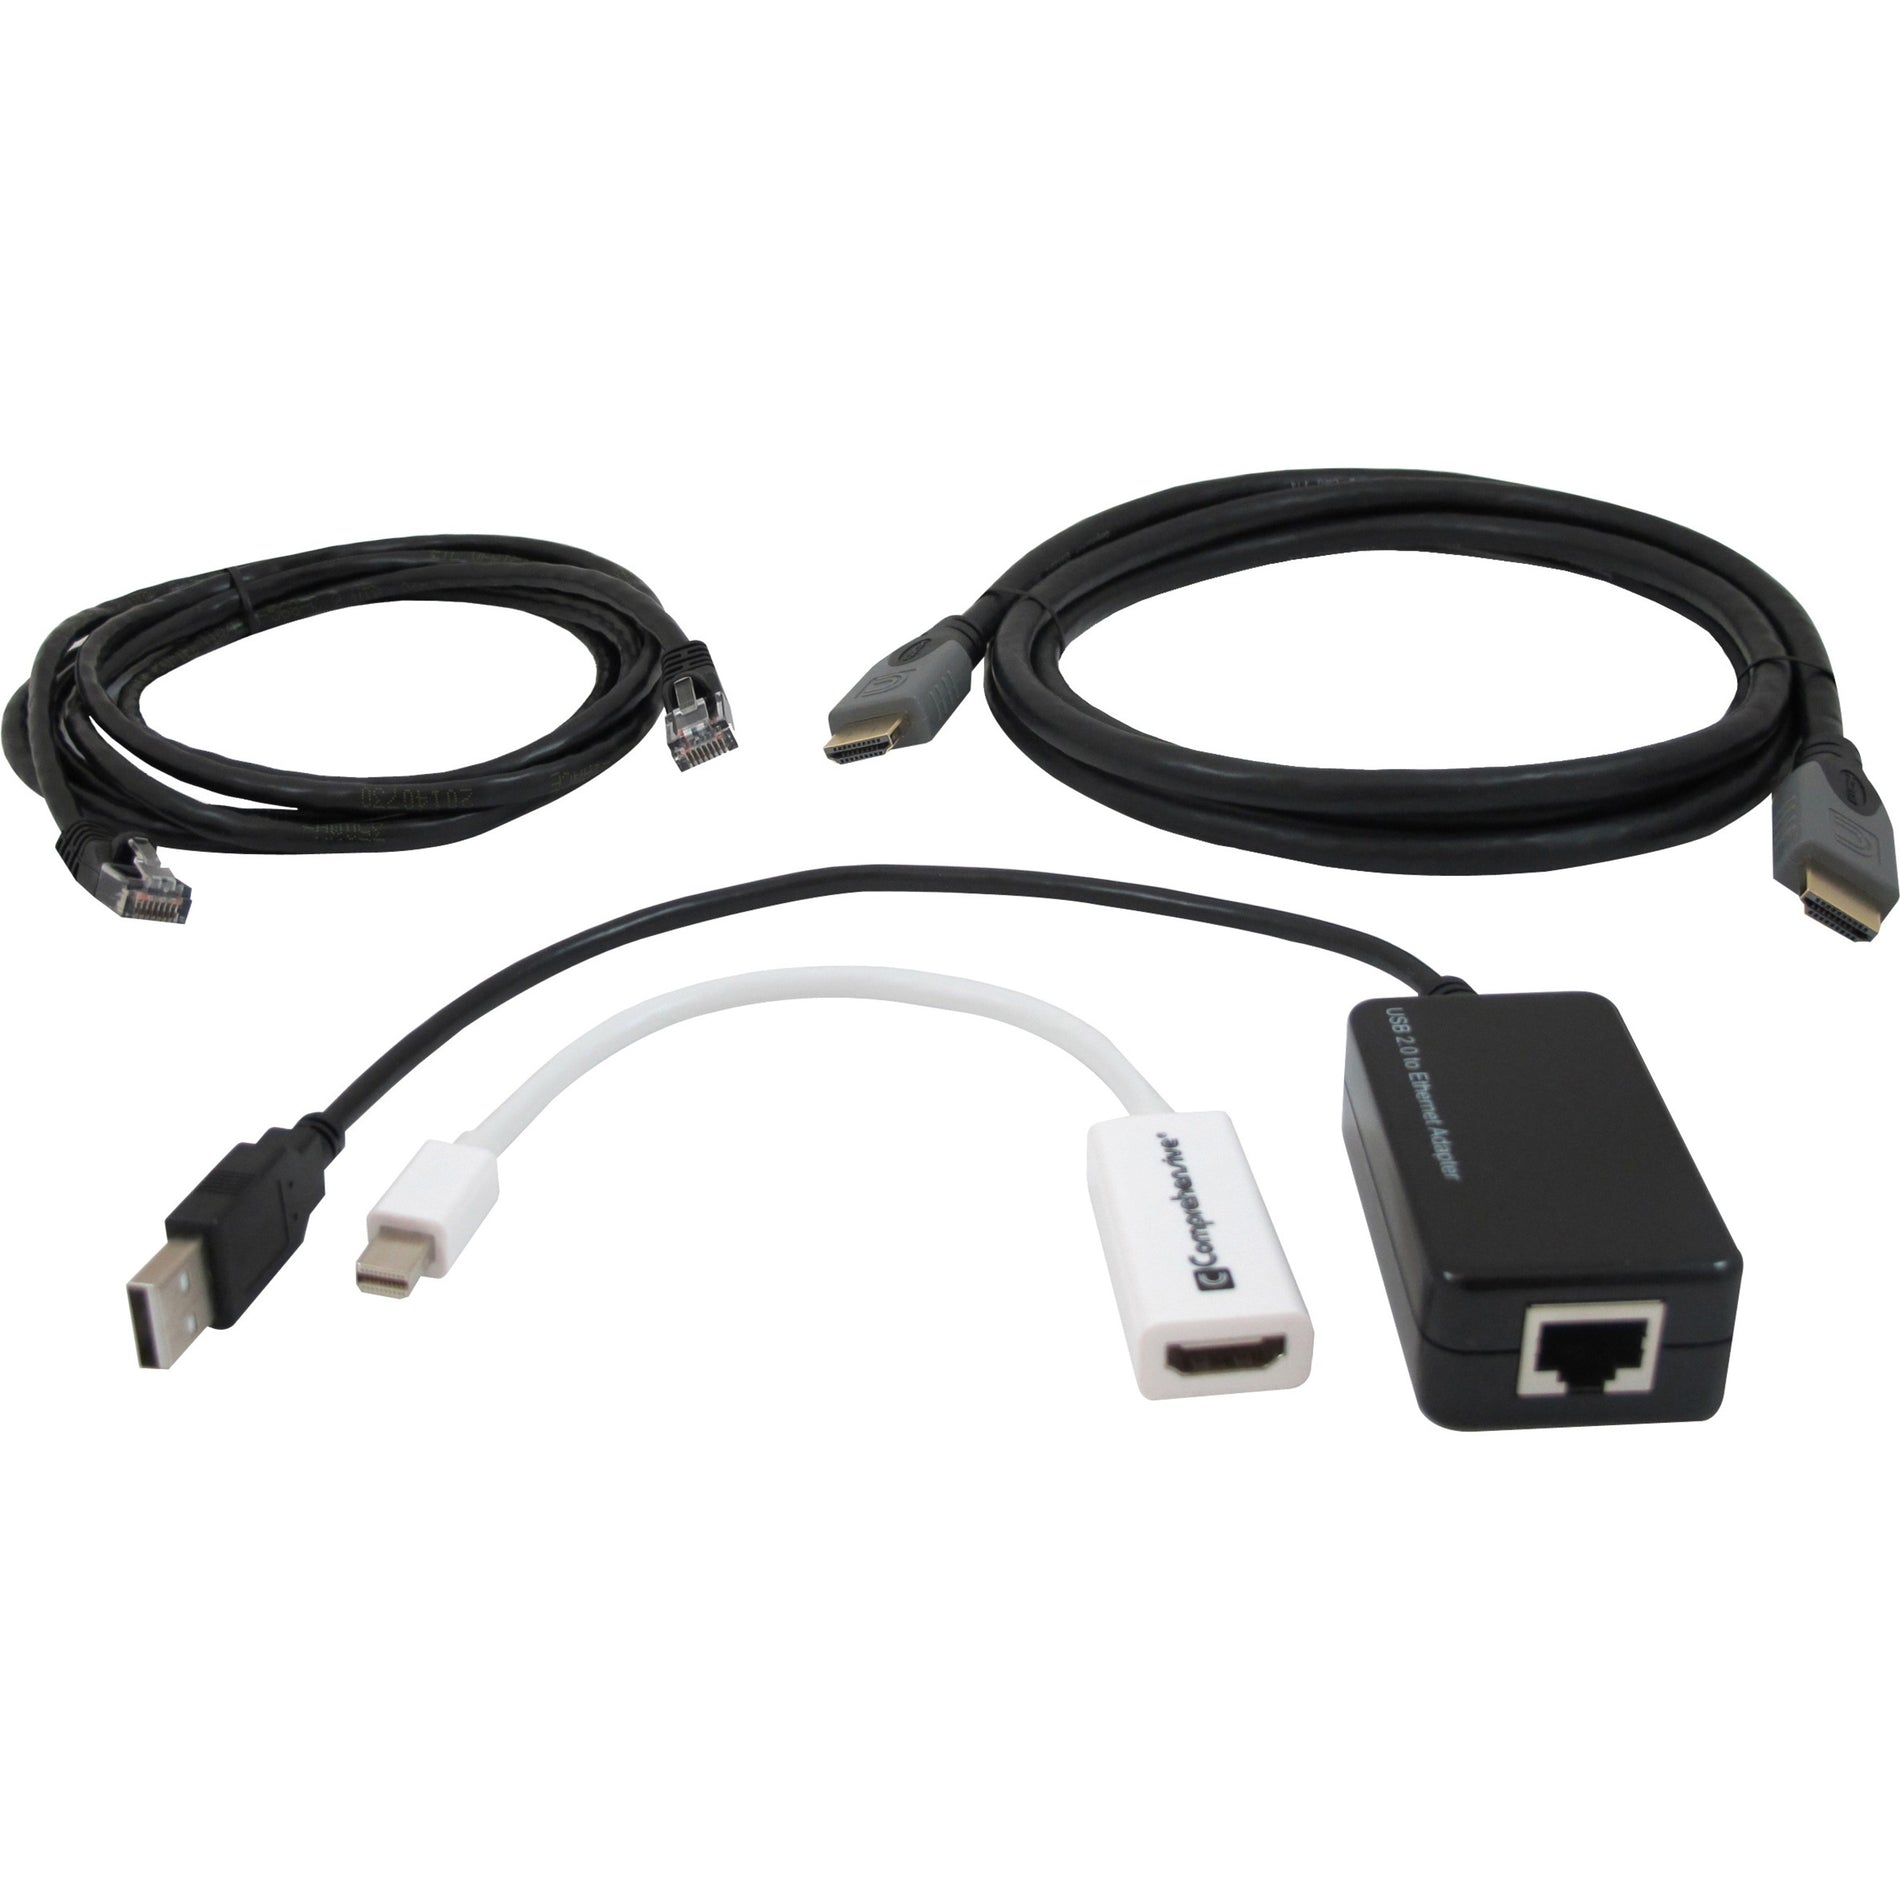 Comprehensive CCK-MH01 Macbook HDMI and Networking Connectivity Kit, Lifetime Warranty, HDMI and Ethernet Adapter, HDMI Cable